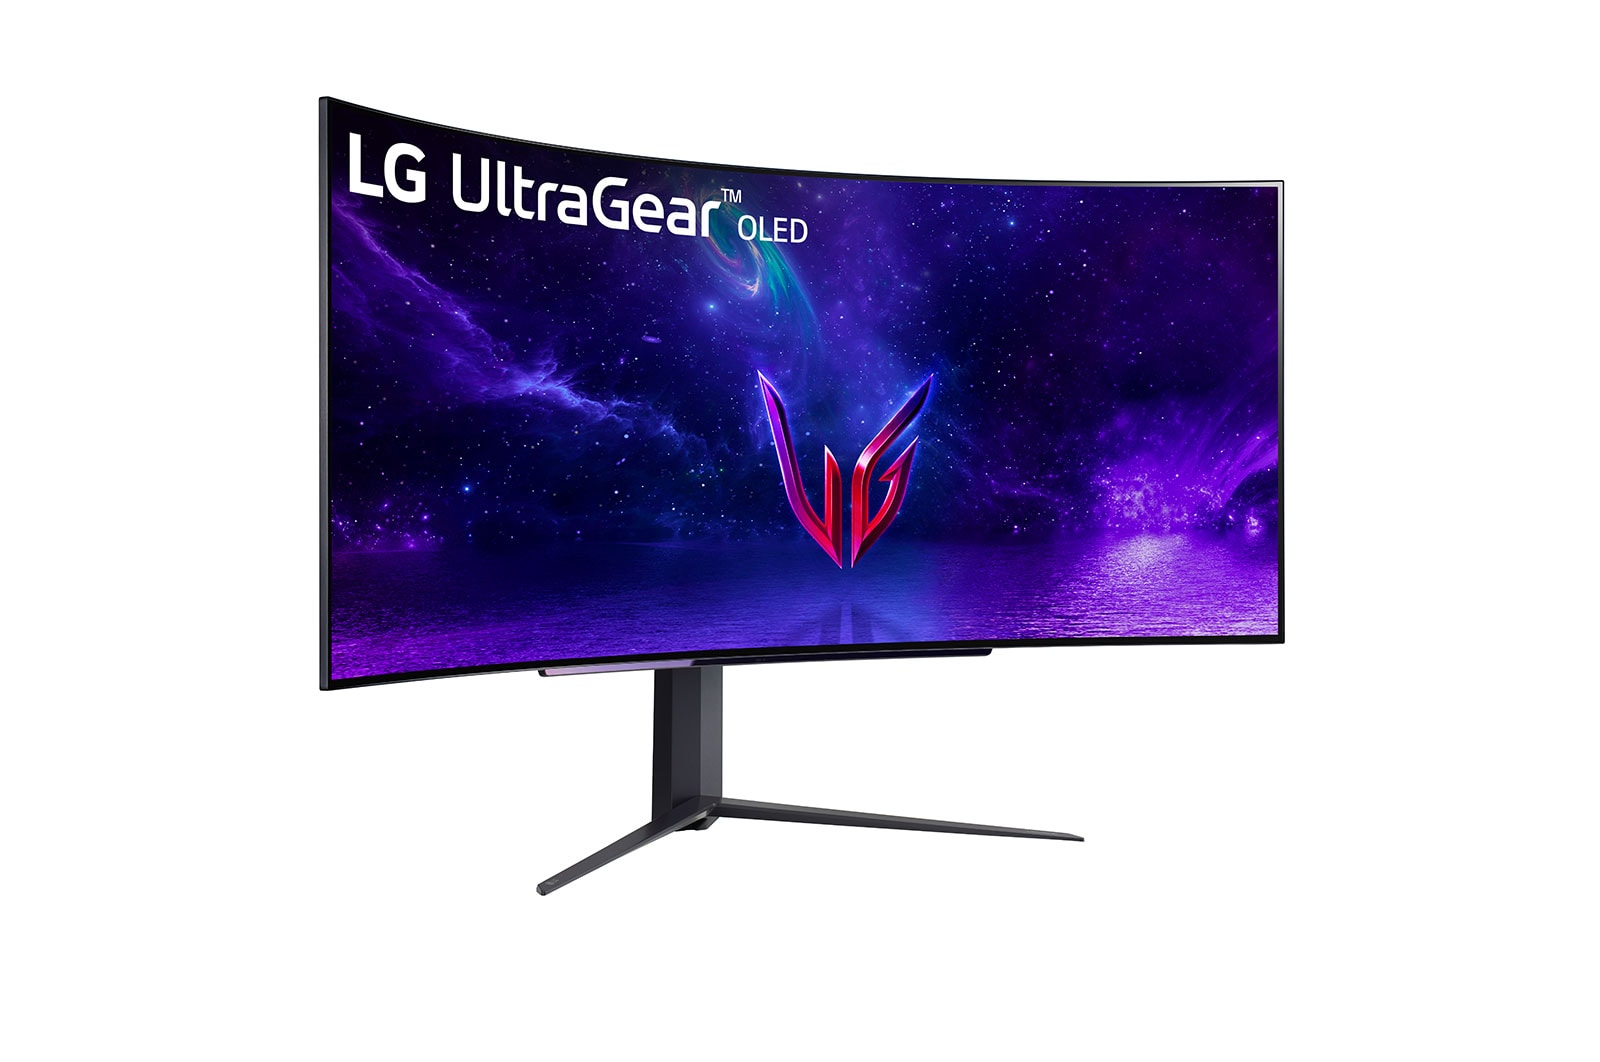 Media asset in full size related to 3dfxzone.it news item entitled as follows: LG introduce il gaming monitor UltraGear 45GR95QE-B con pannello OLED da 45-inch | Image Name: news33901_LG-UltraGear-45GR95QE-B_1.jpg